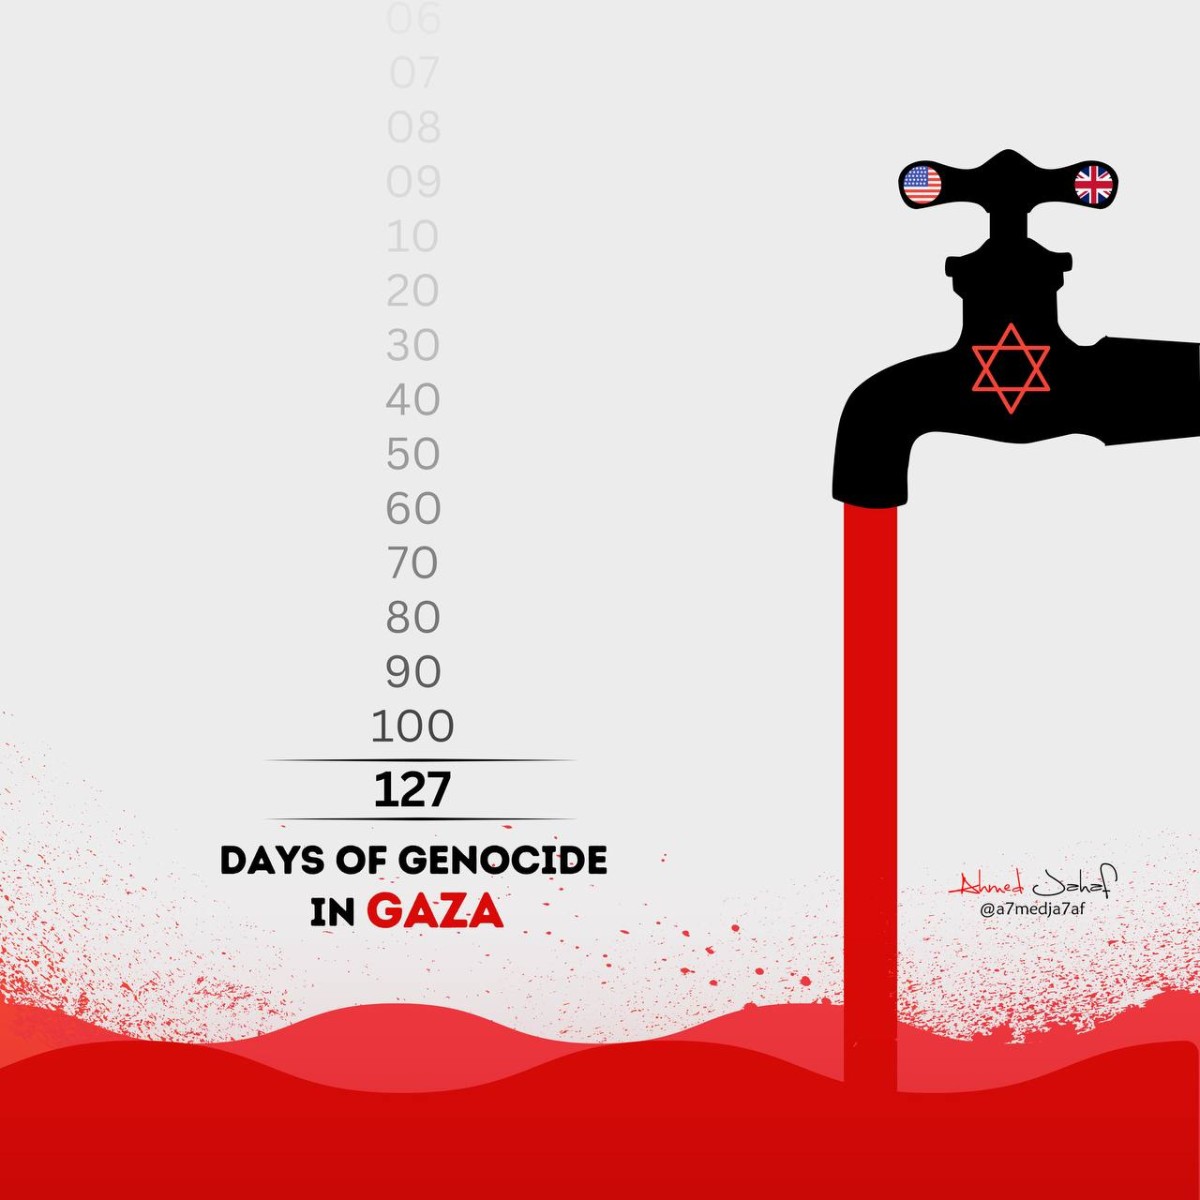 127 days of genocide in Gaza, by the Zionist entity “Israel” with US and UK support